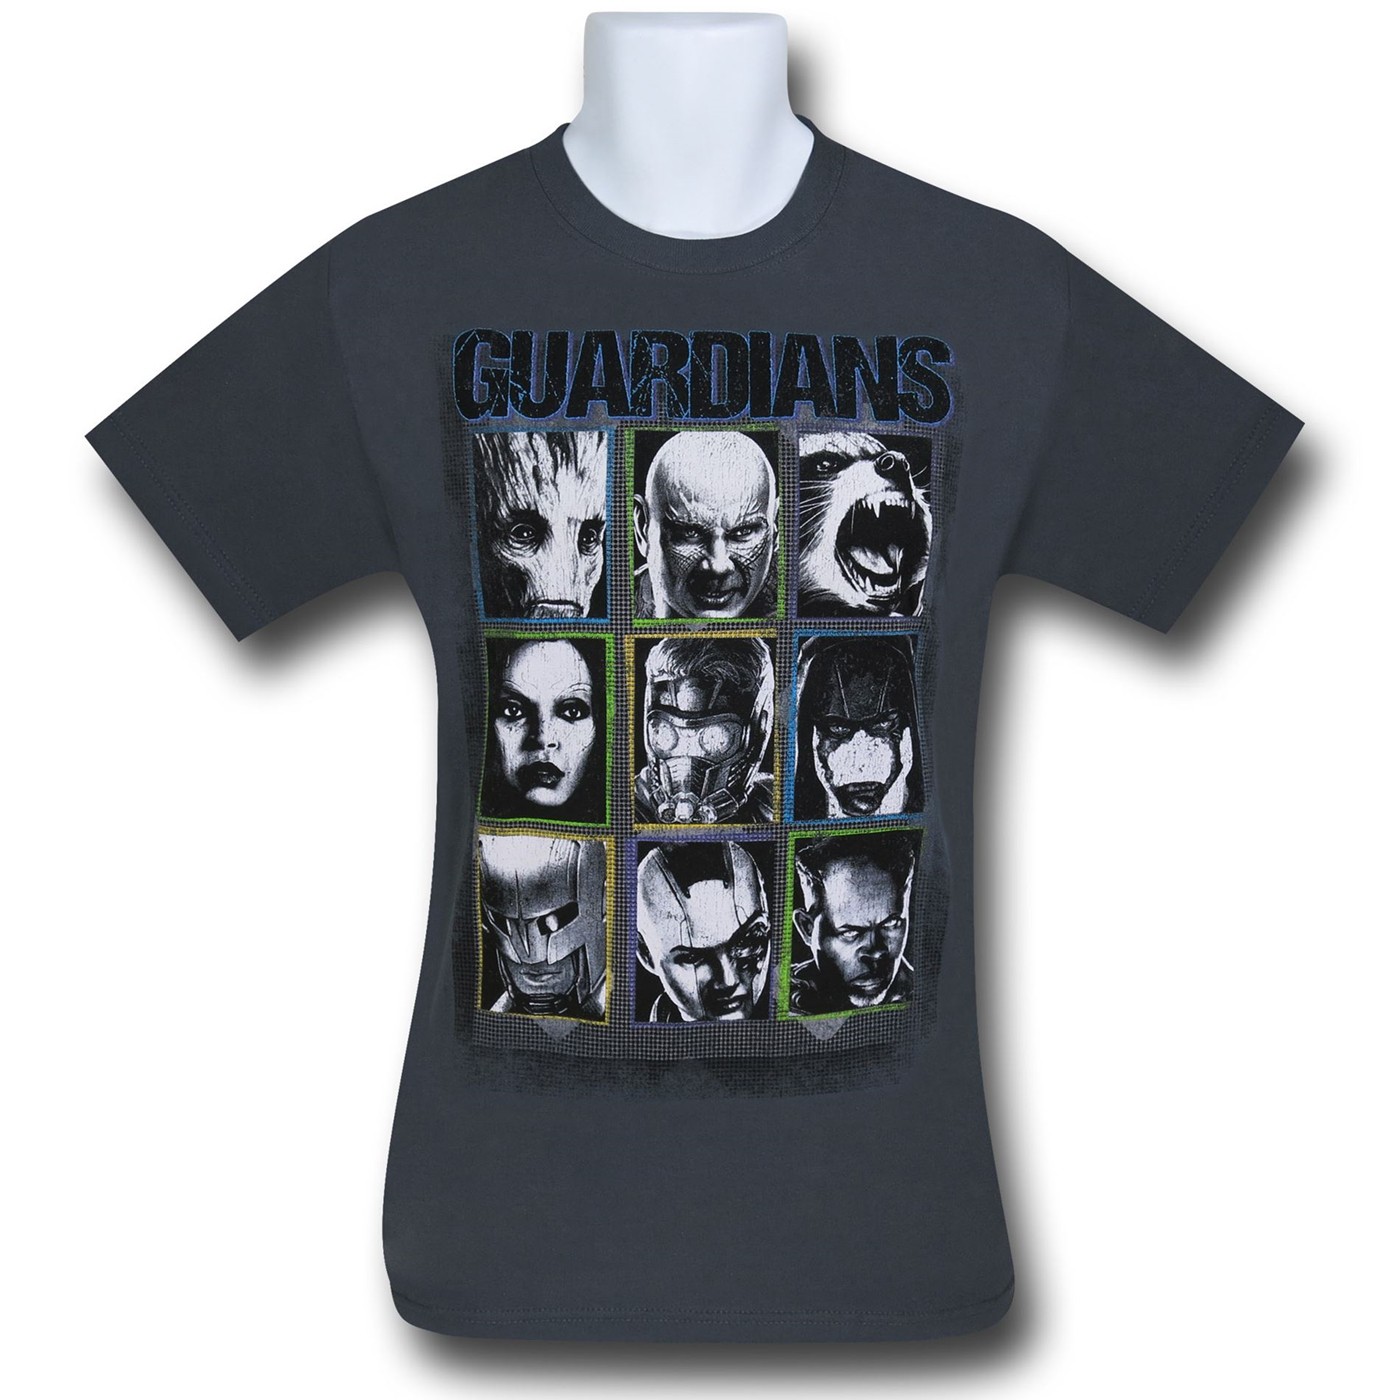 Guardians of the Galaxy Faces Kids T-Shirt